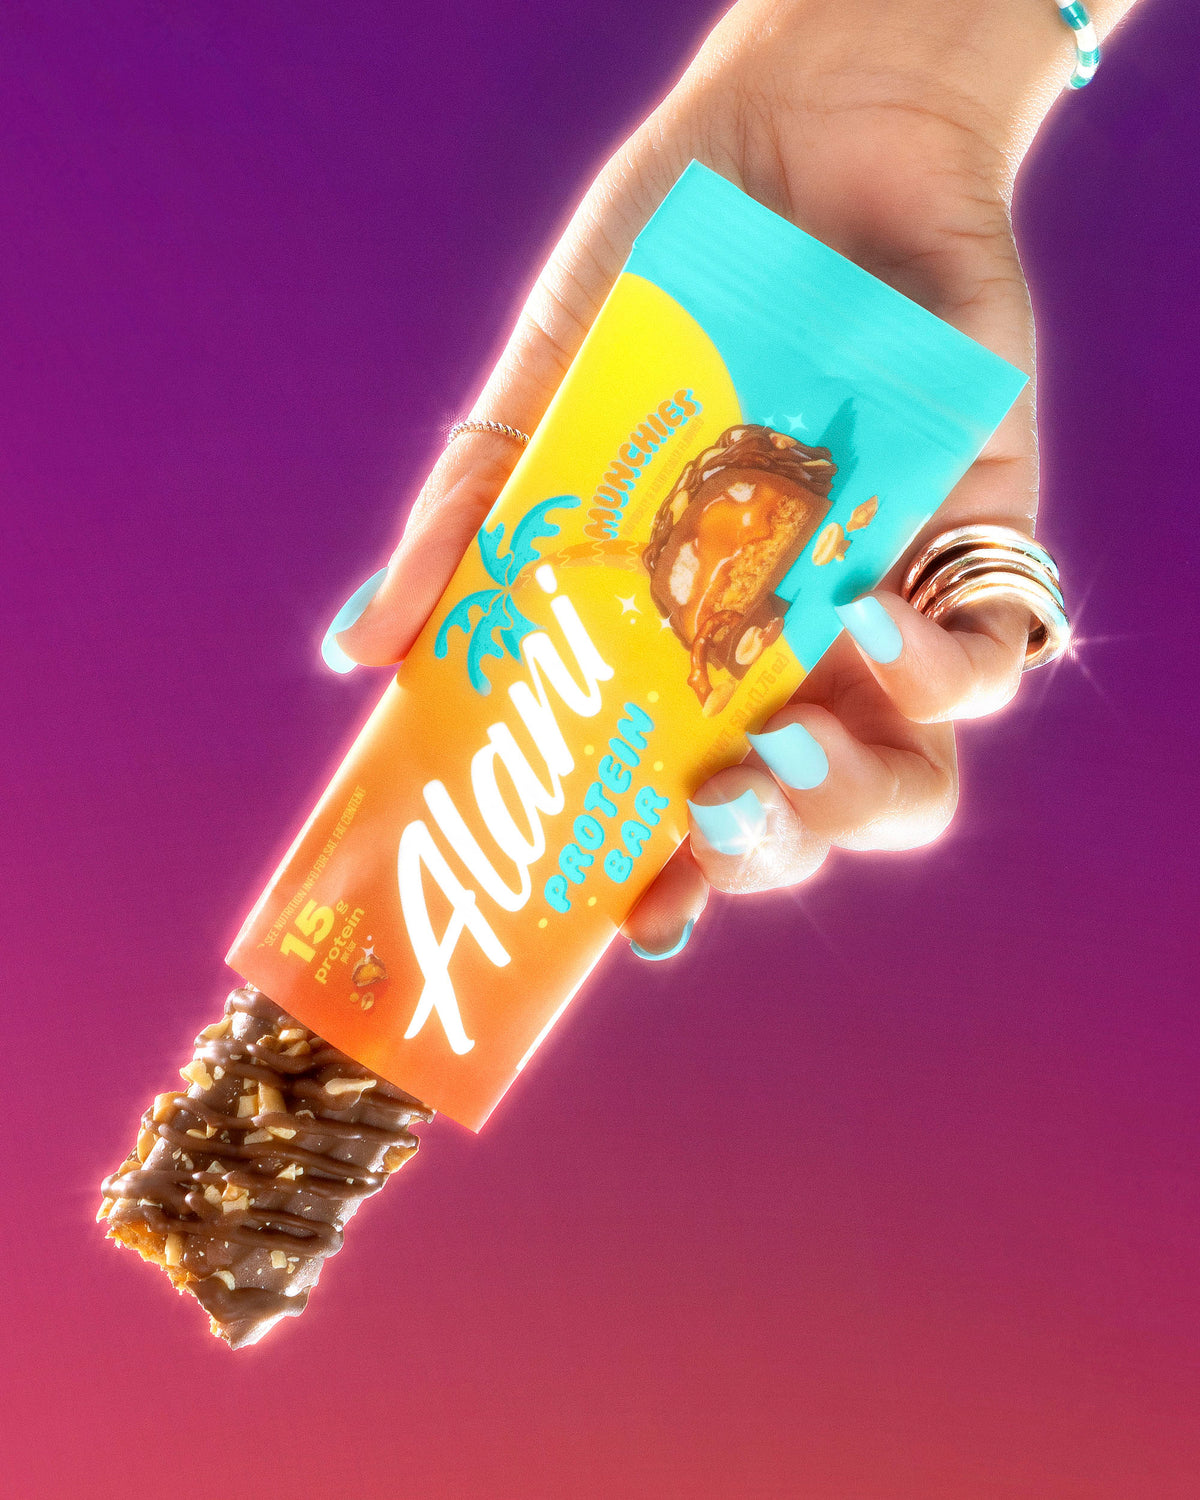 A women holding a protein bar in flavor munchies.